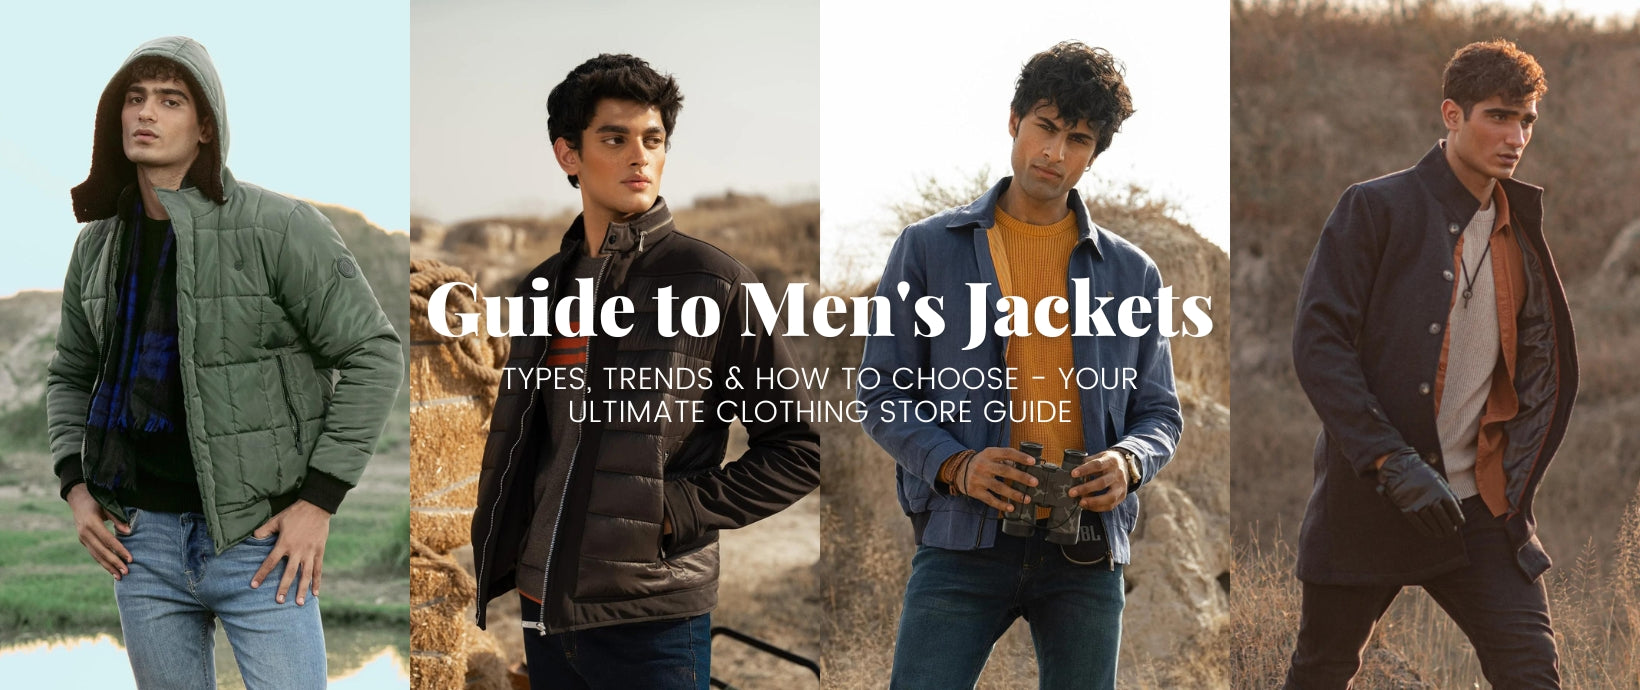 Guide to Men's Jackets: Types, Trends & How to Choose - Your